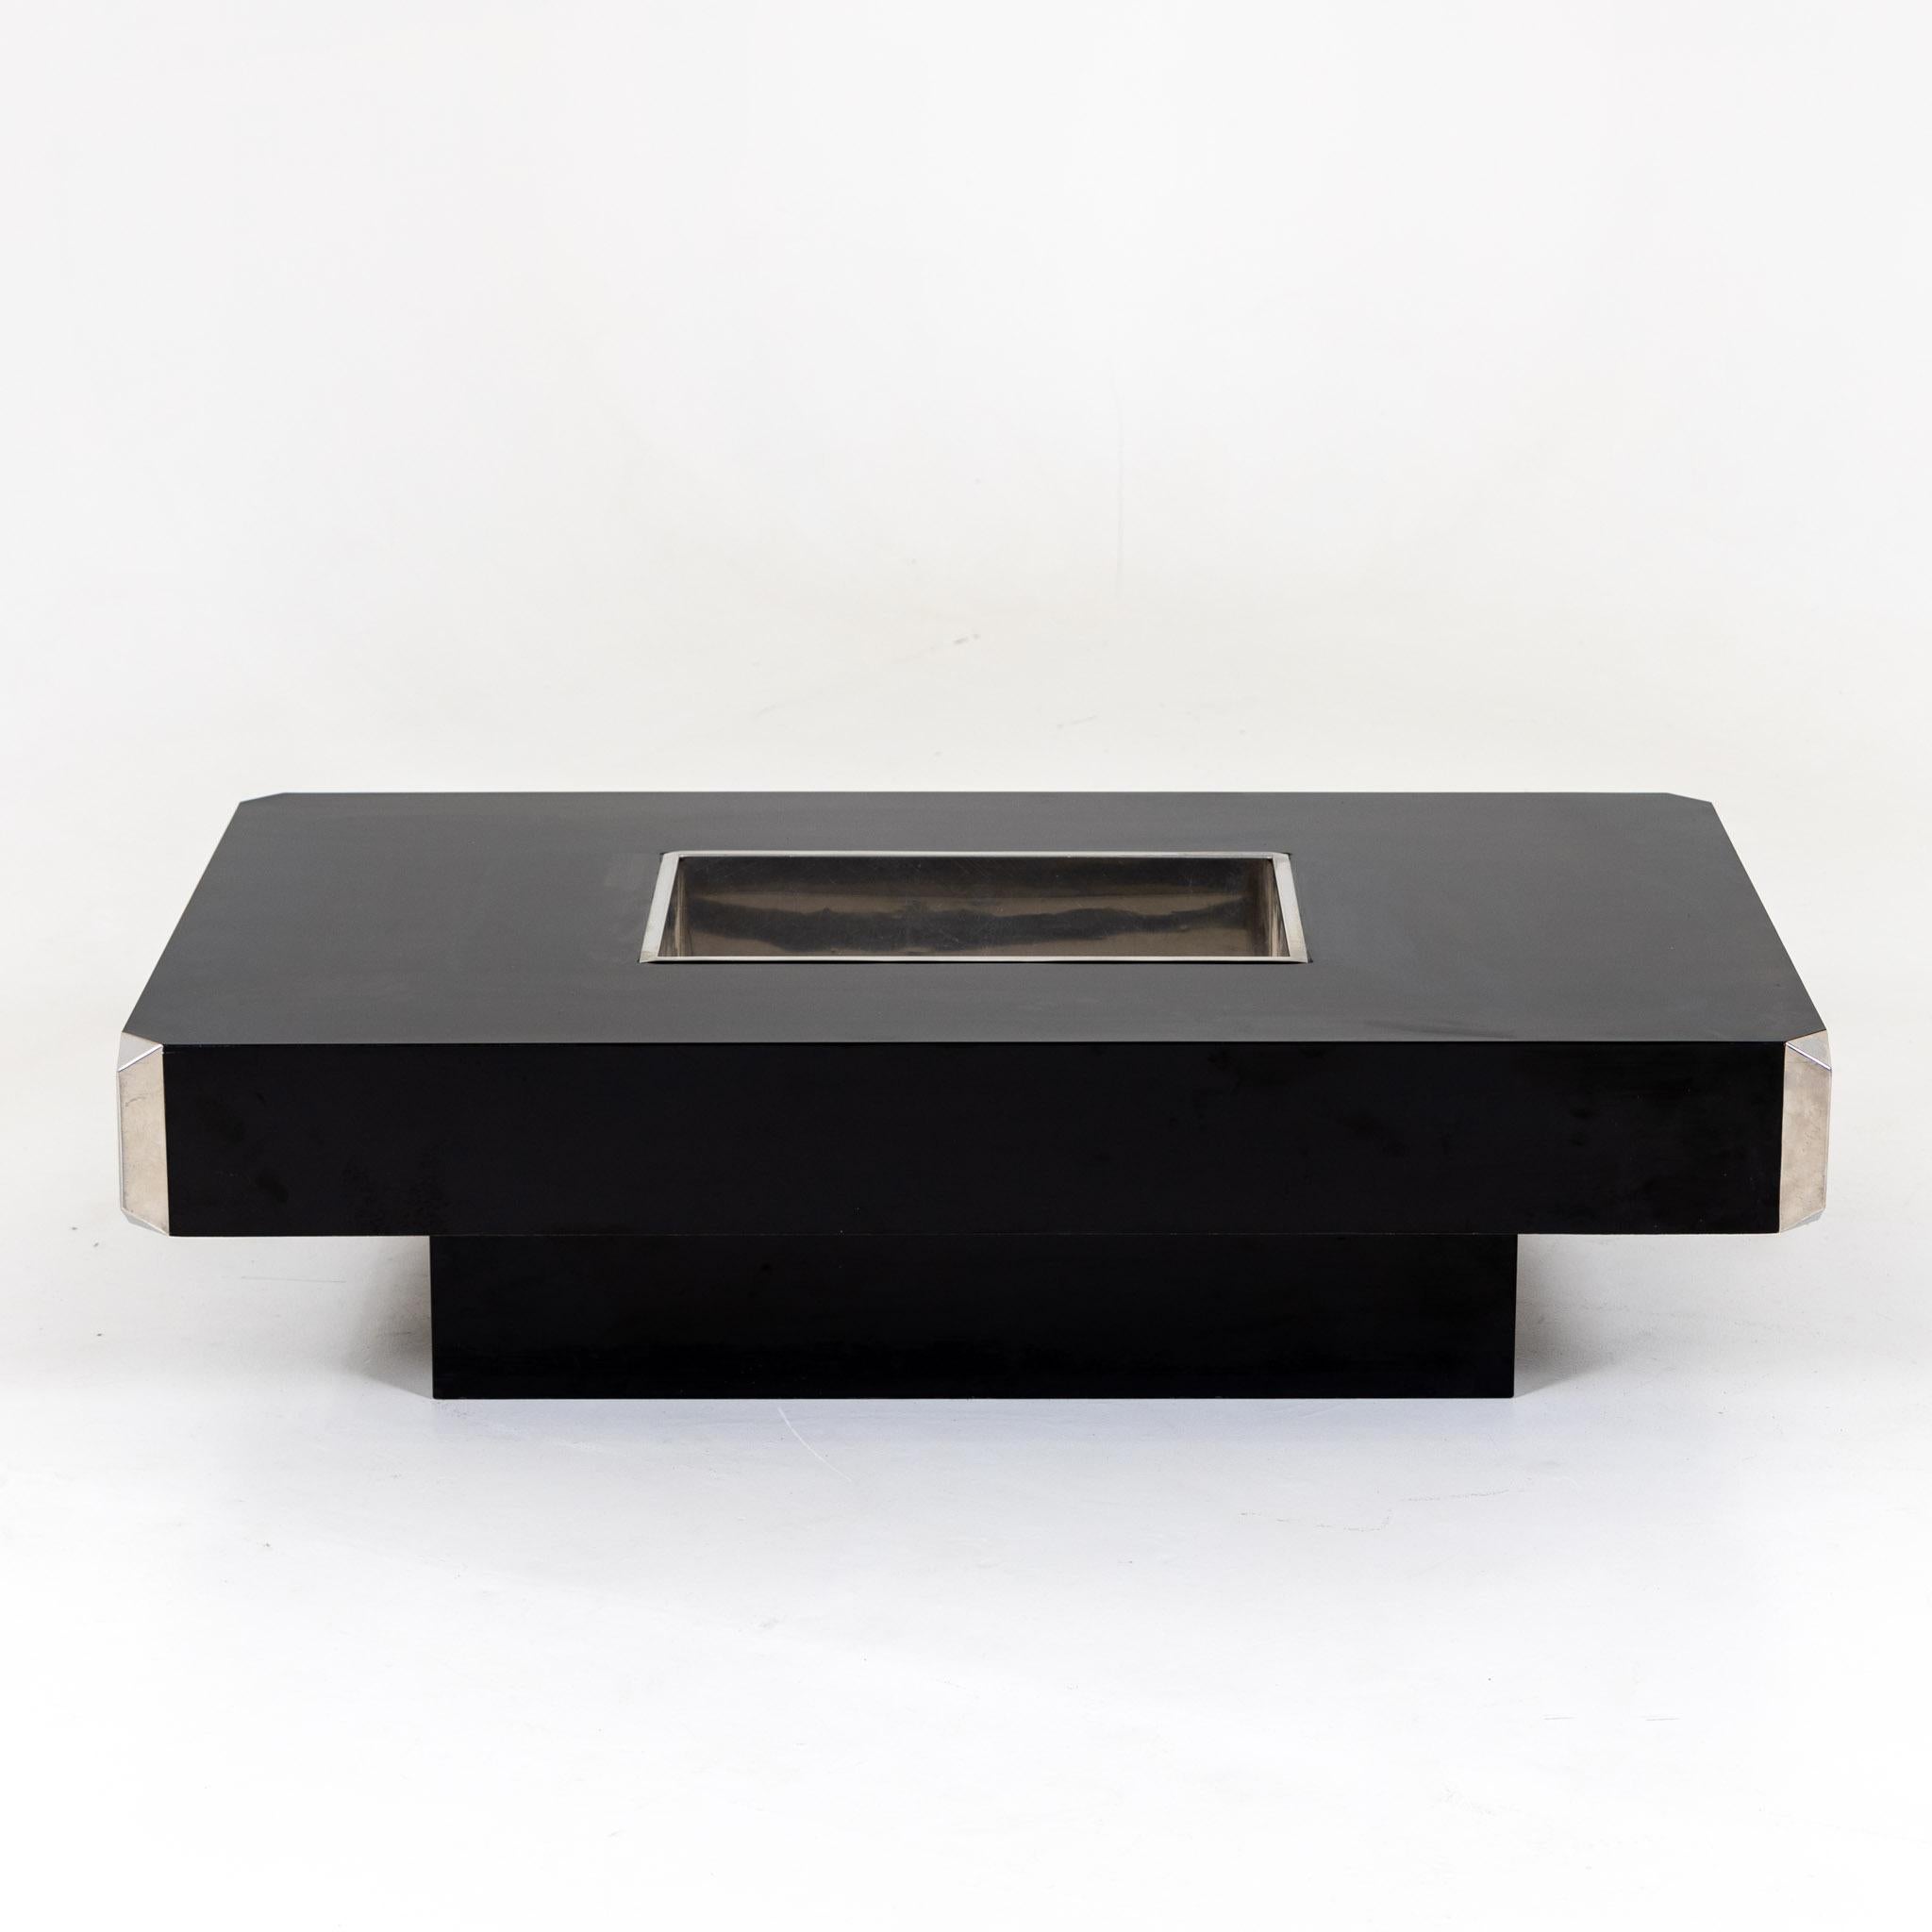 Italian Black Coffee Table Alveo with stainless steel basin by Willy Rizzo, Italy 1970s